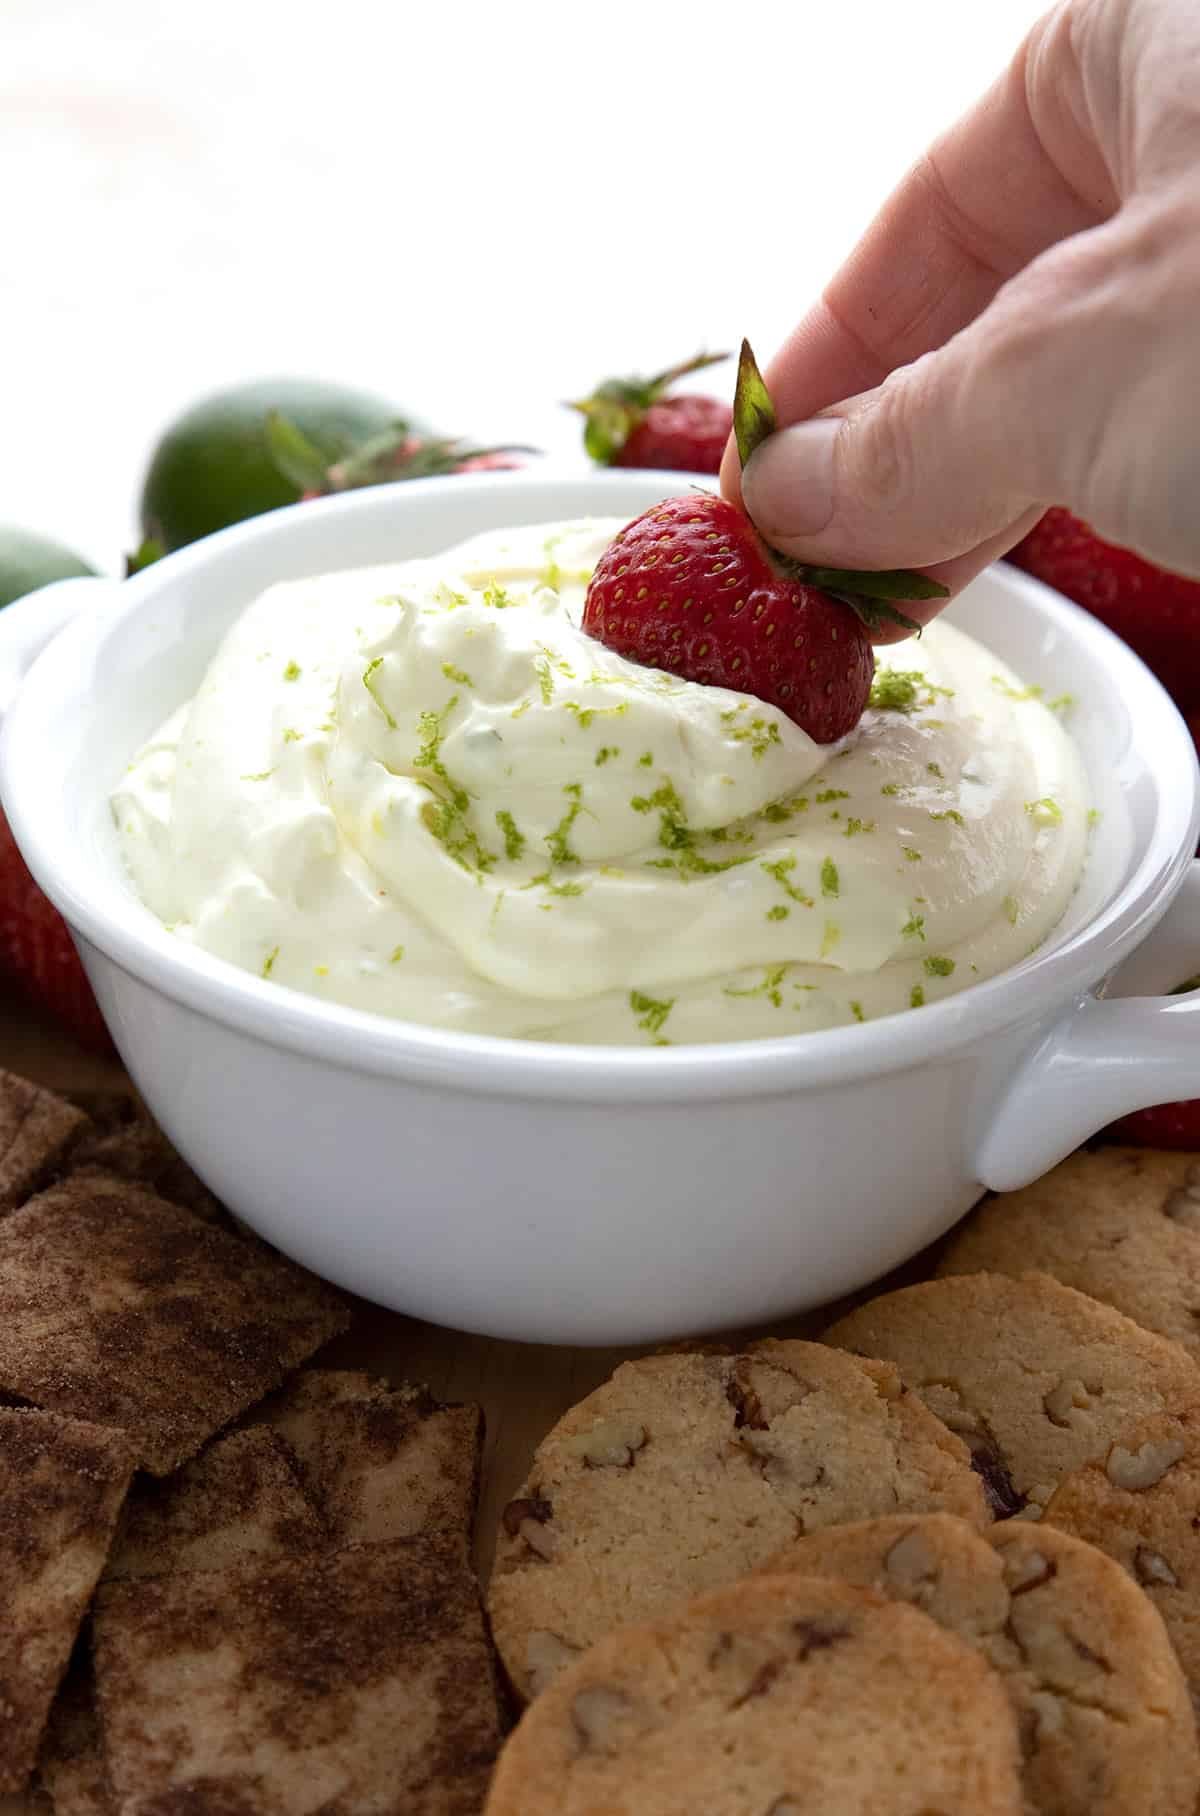 Dipping a strawberry into a bowl of keto fruit dip.